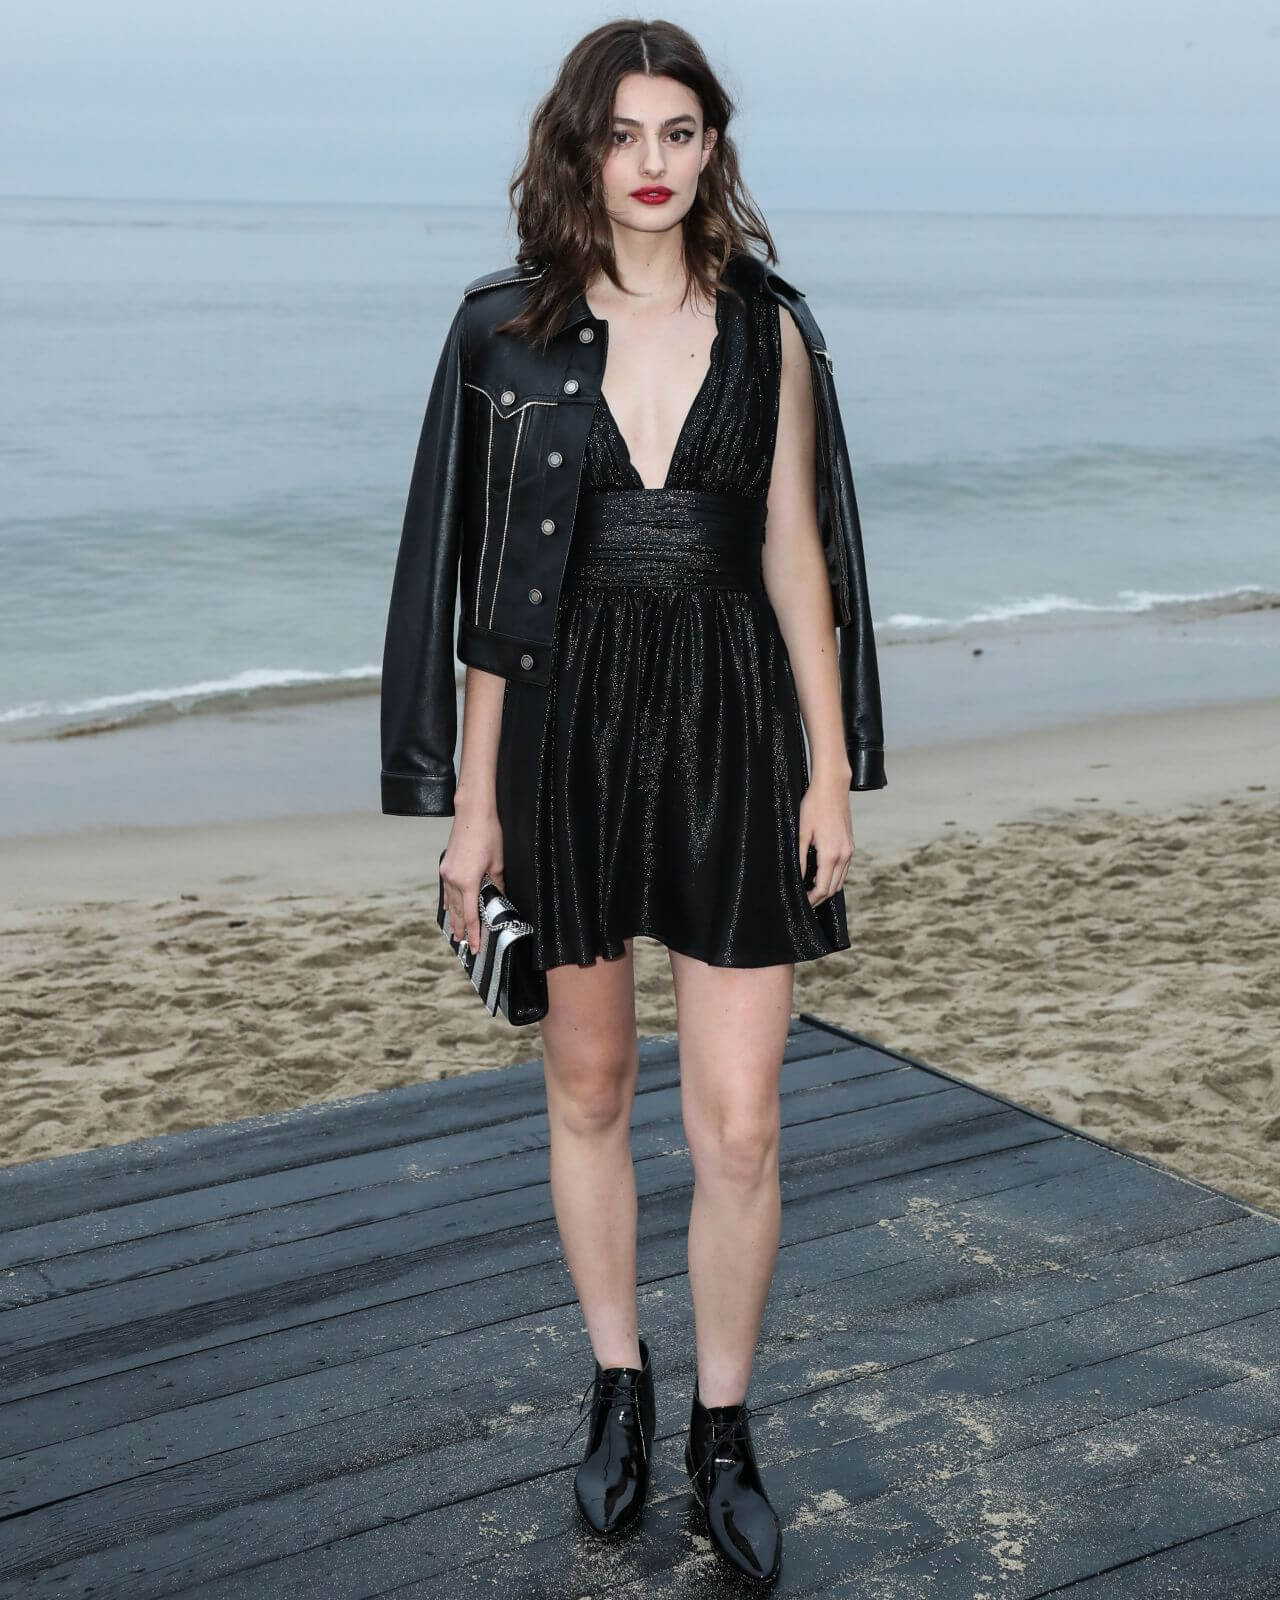 Diana Silvers In Black Shimmery Neckline Short Dress With Jacket